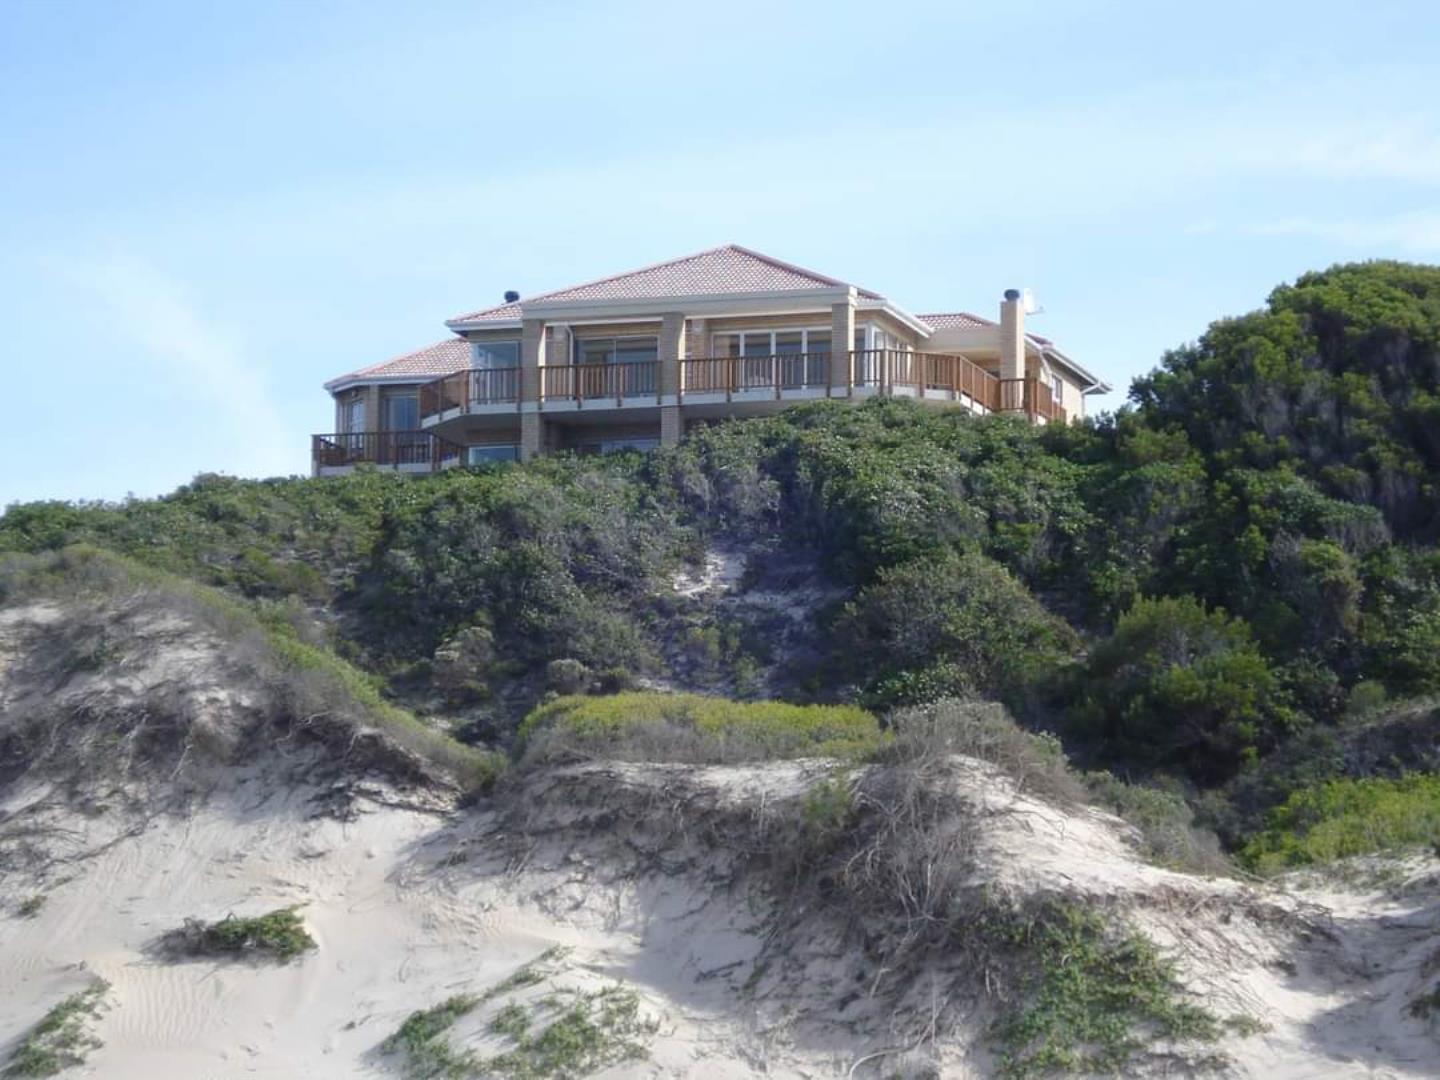 6 Bedroom  House for Sale in Jeffreys Bay - Eastern Cape